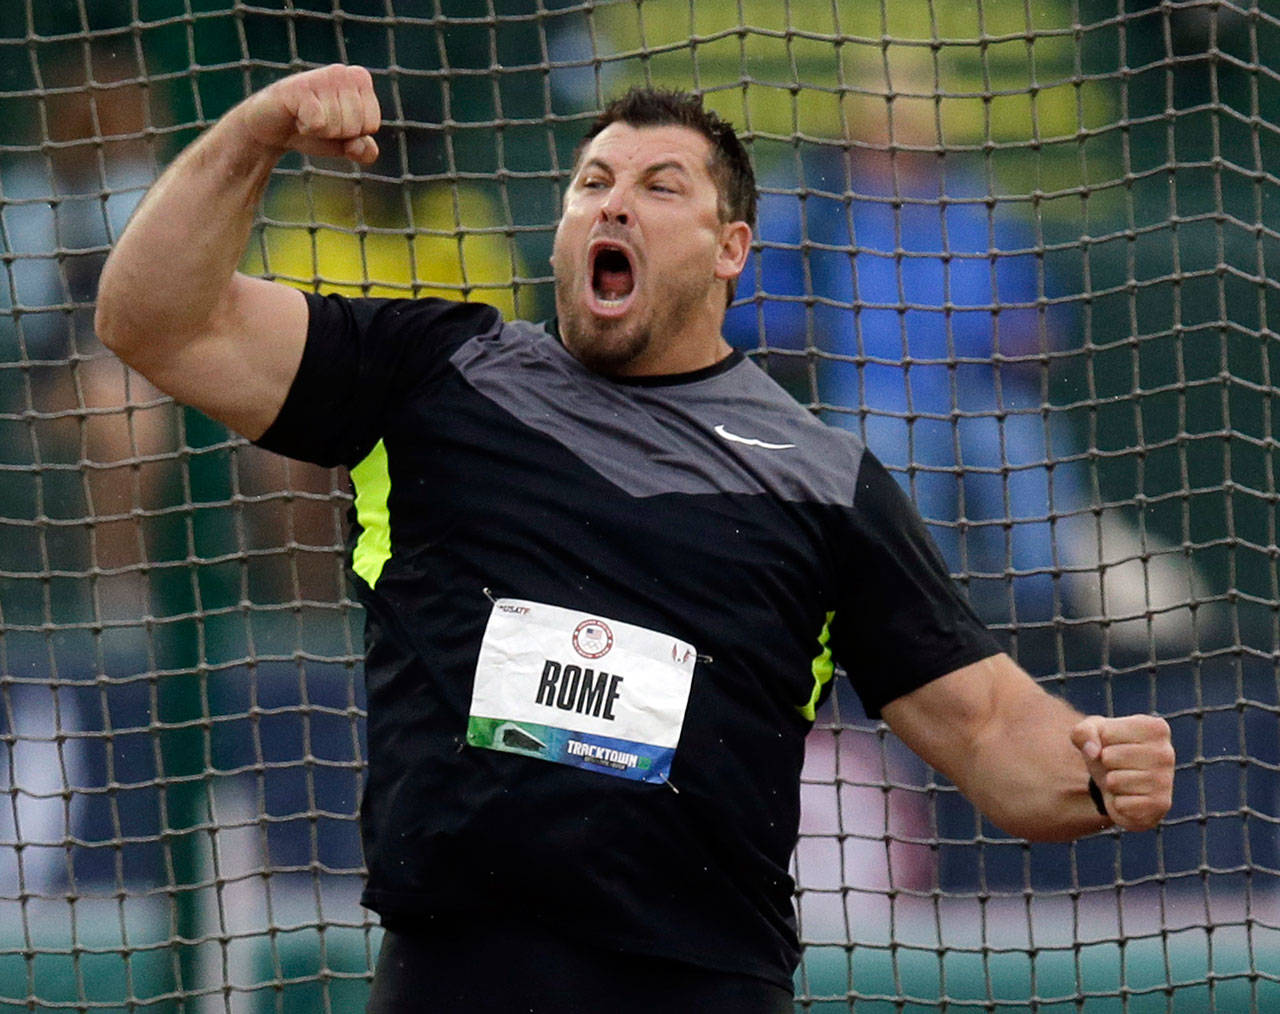 Jarred Rome celebrates his second-place finish in the men’s discus final June 28, 2012 at the U.S. Olympic Track and Field Trials in Eugene, Ore. The Marysville-Pilchuck High School class of 1995 alumnus died Saturday. He was 42. (AP Photo/Charlie Riedel)